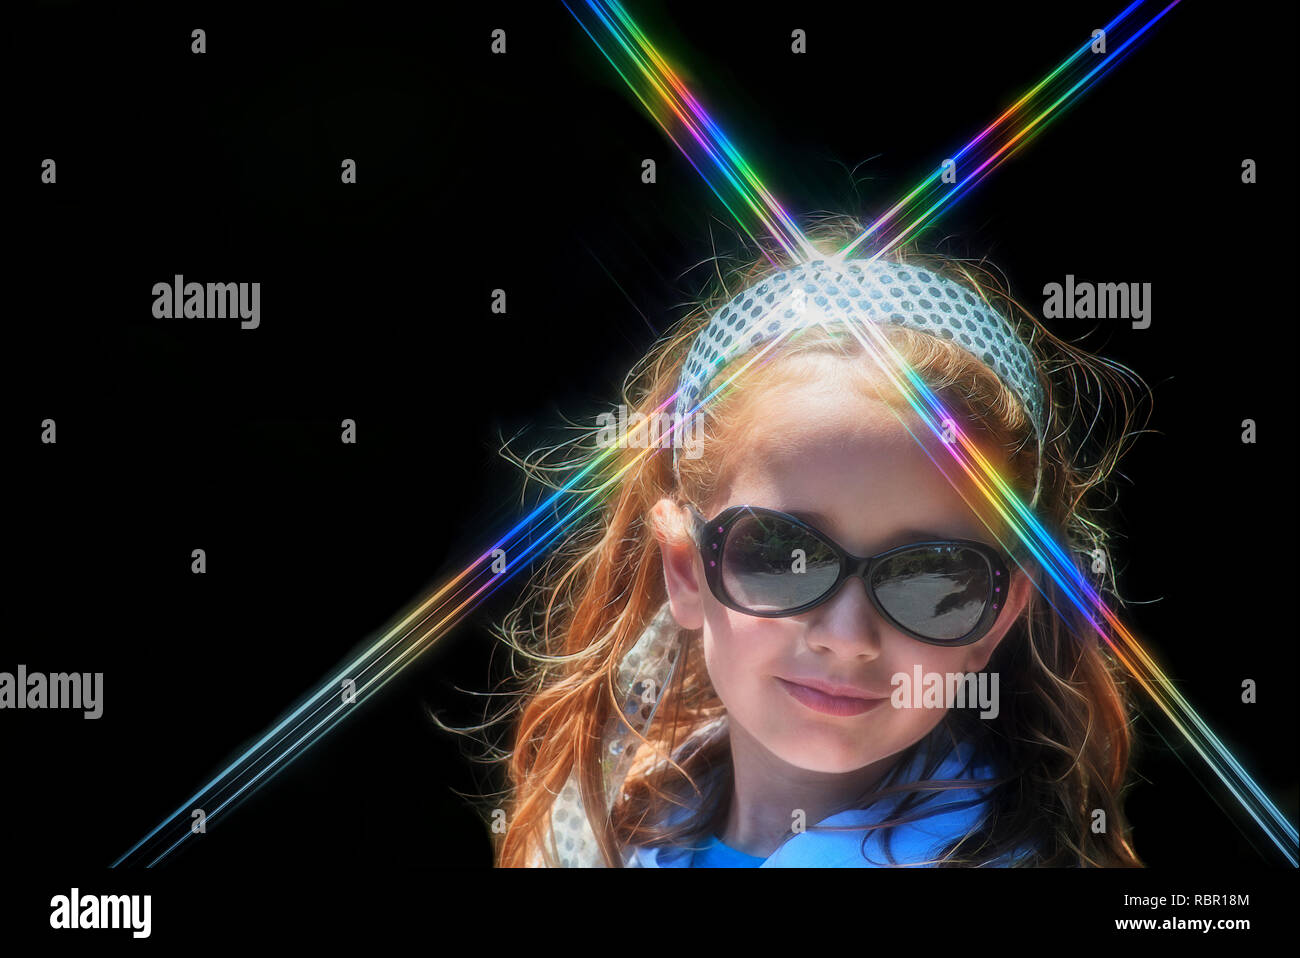 A little girl wearing sunglasses poses for a portrait wearing a sparkly headband that refracts rainbow light. Stock Photo